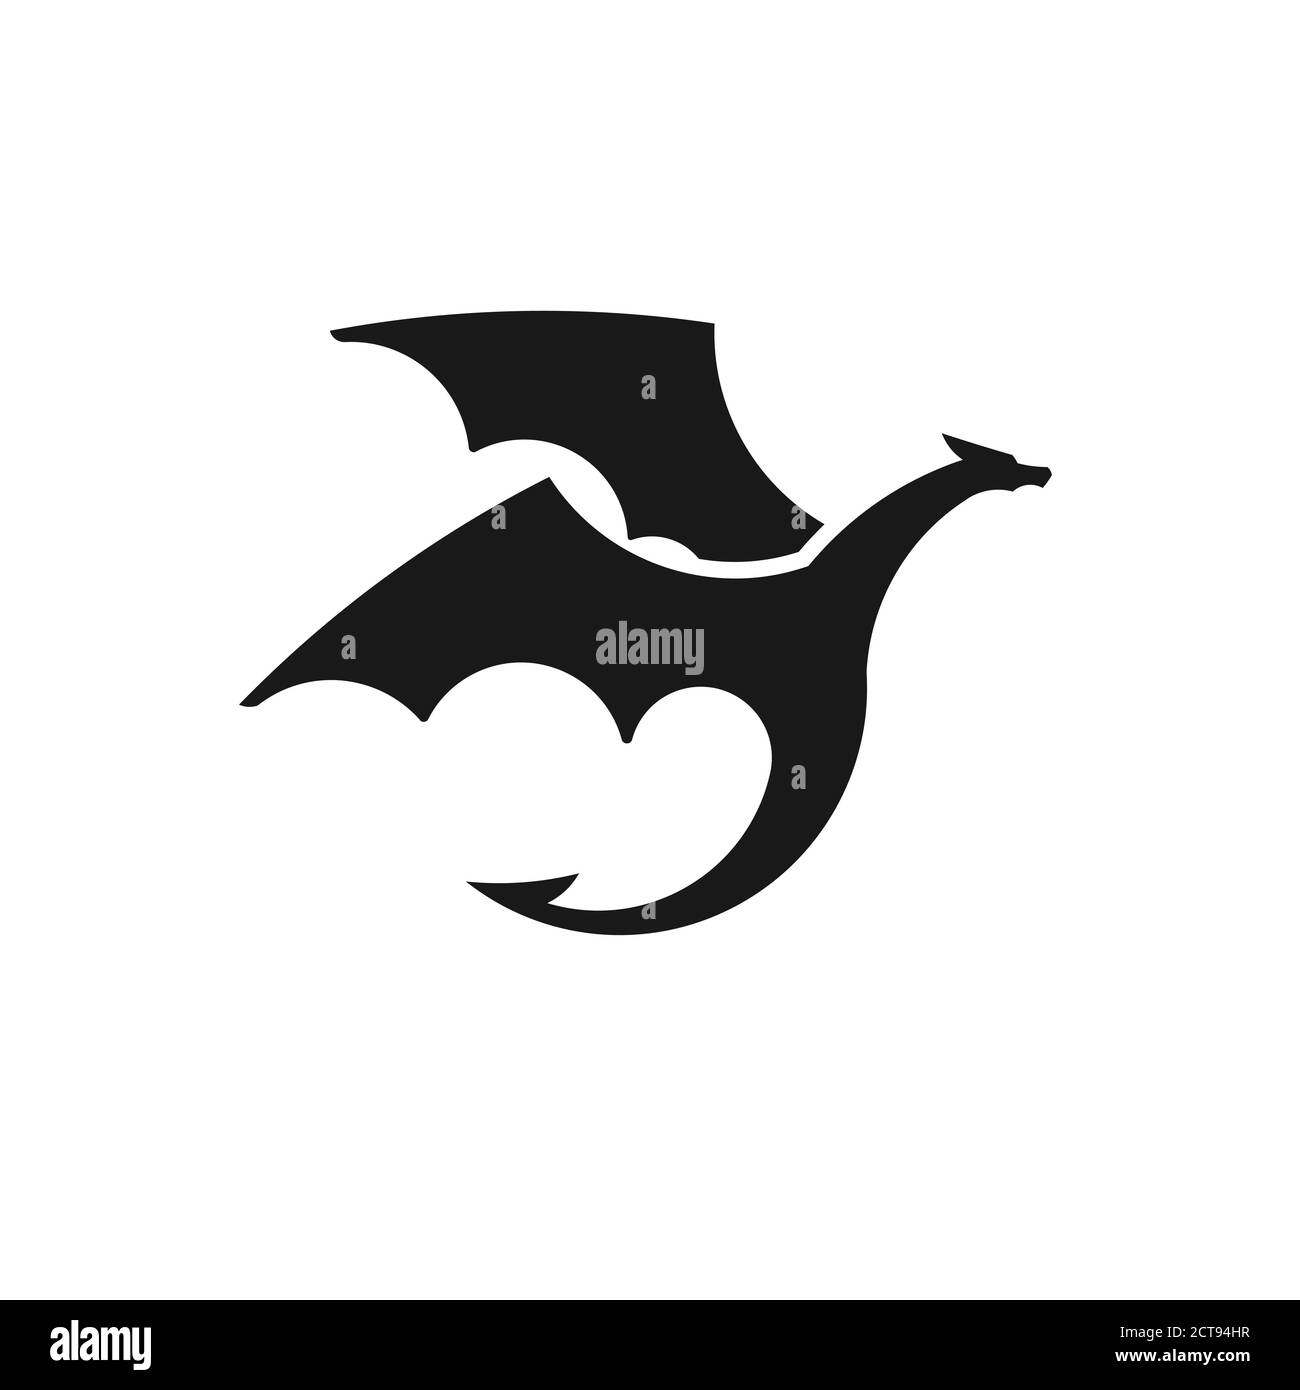 Black stylized vector illustrations of dragons silhouettes logo Stock Vector